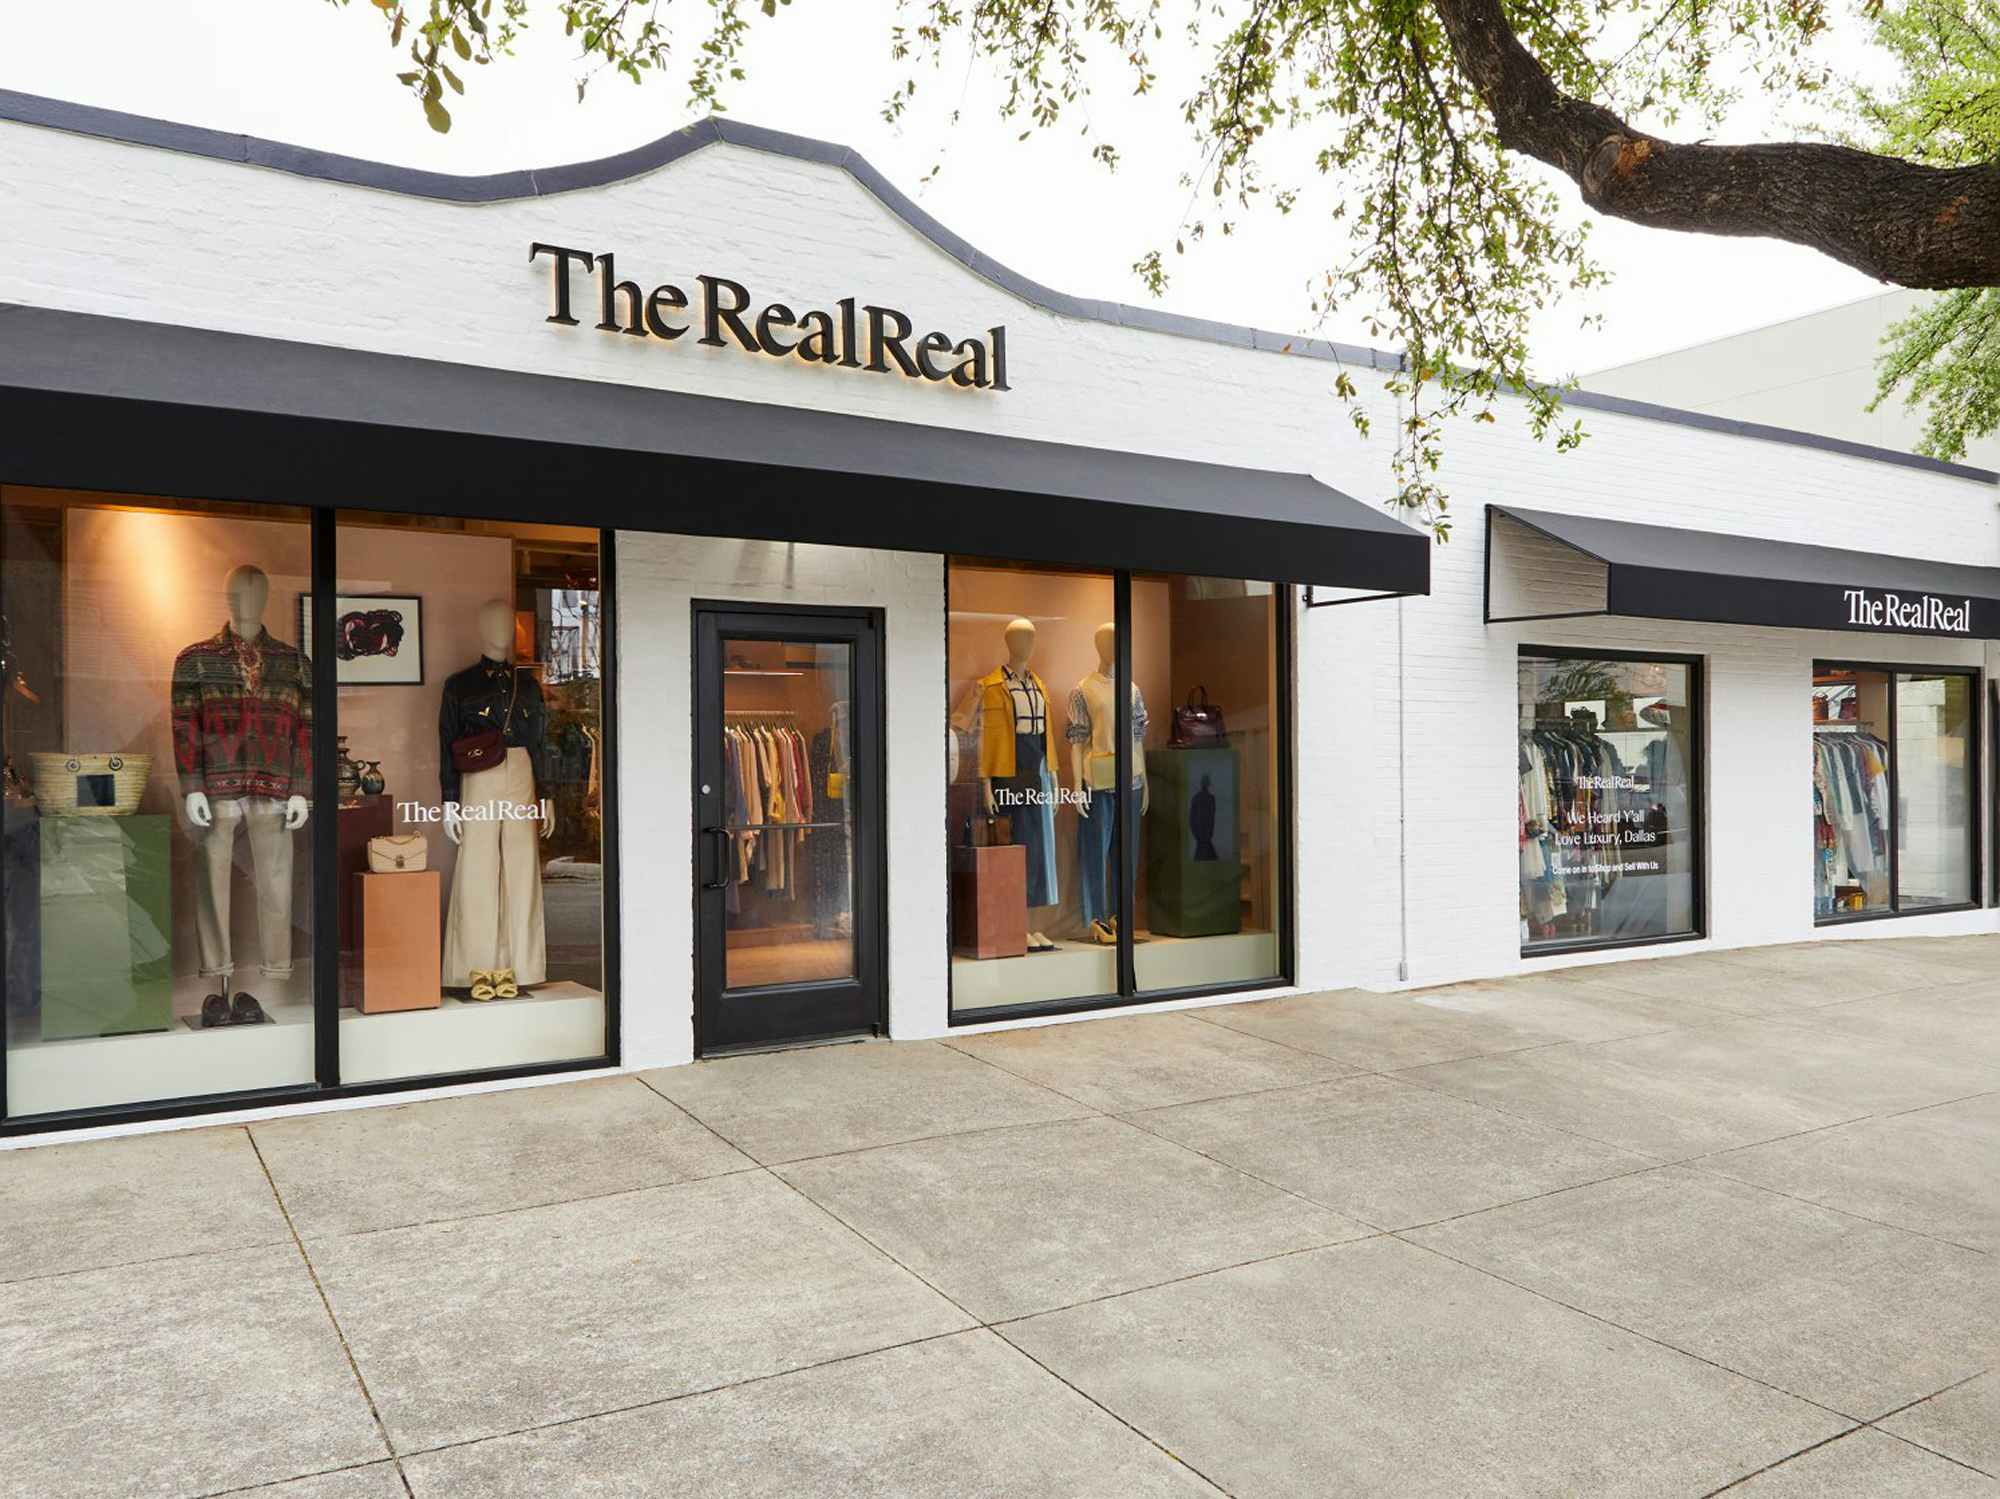 Is The RealReal Legit? How to Know You're Getting a Good Deal